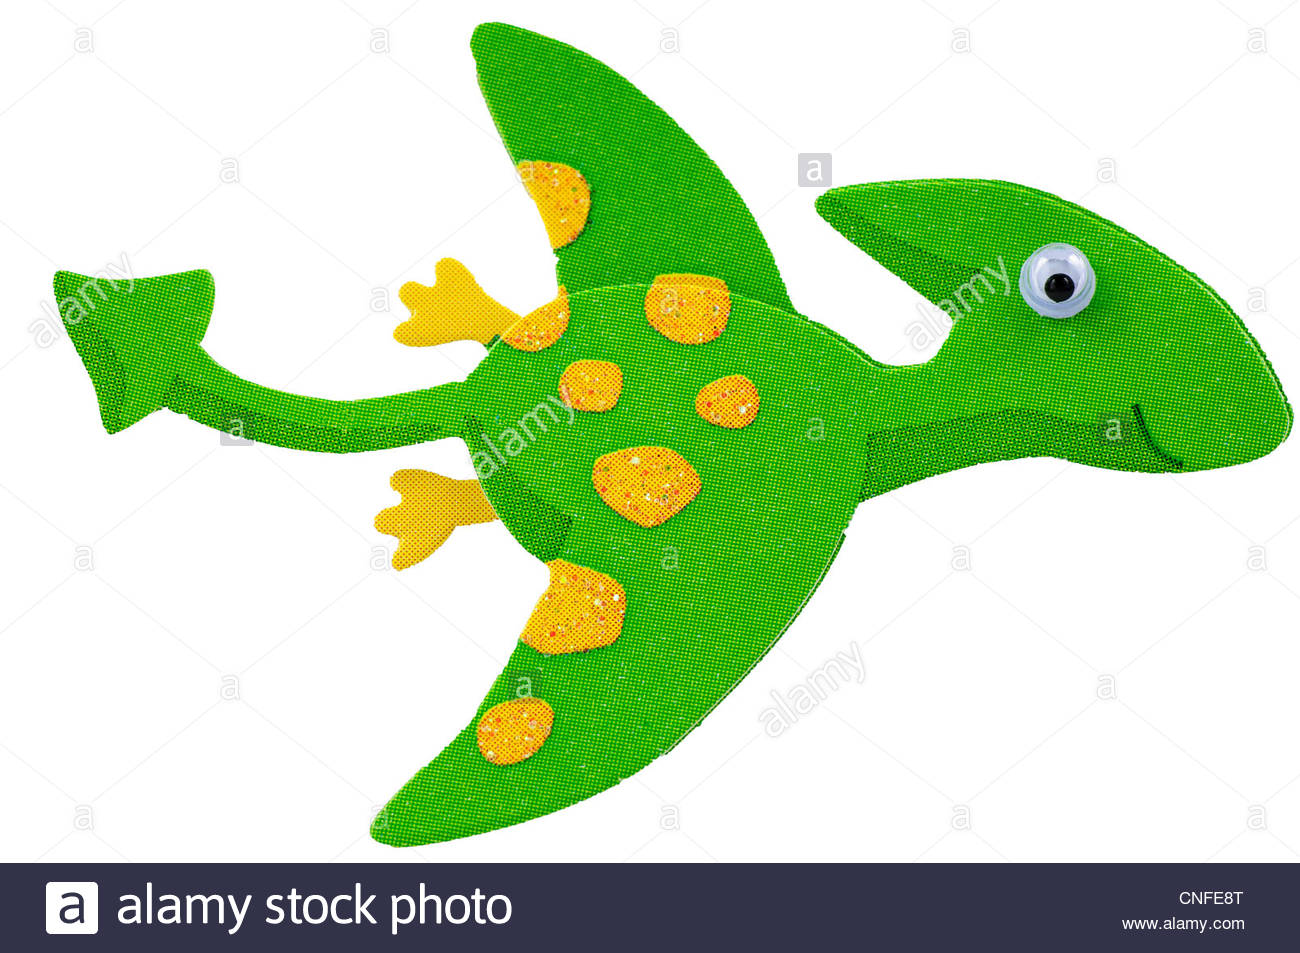 Close Up Of A Fun Green Pterodactyl Dinosaur With Googly Eyes On